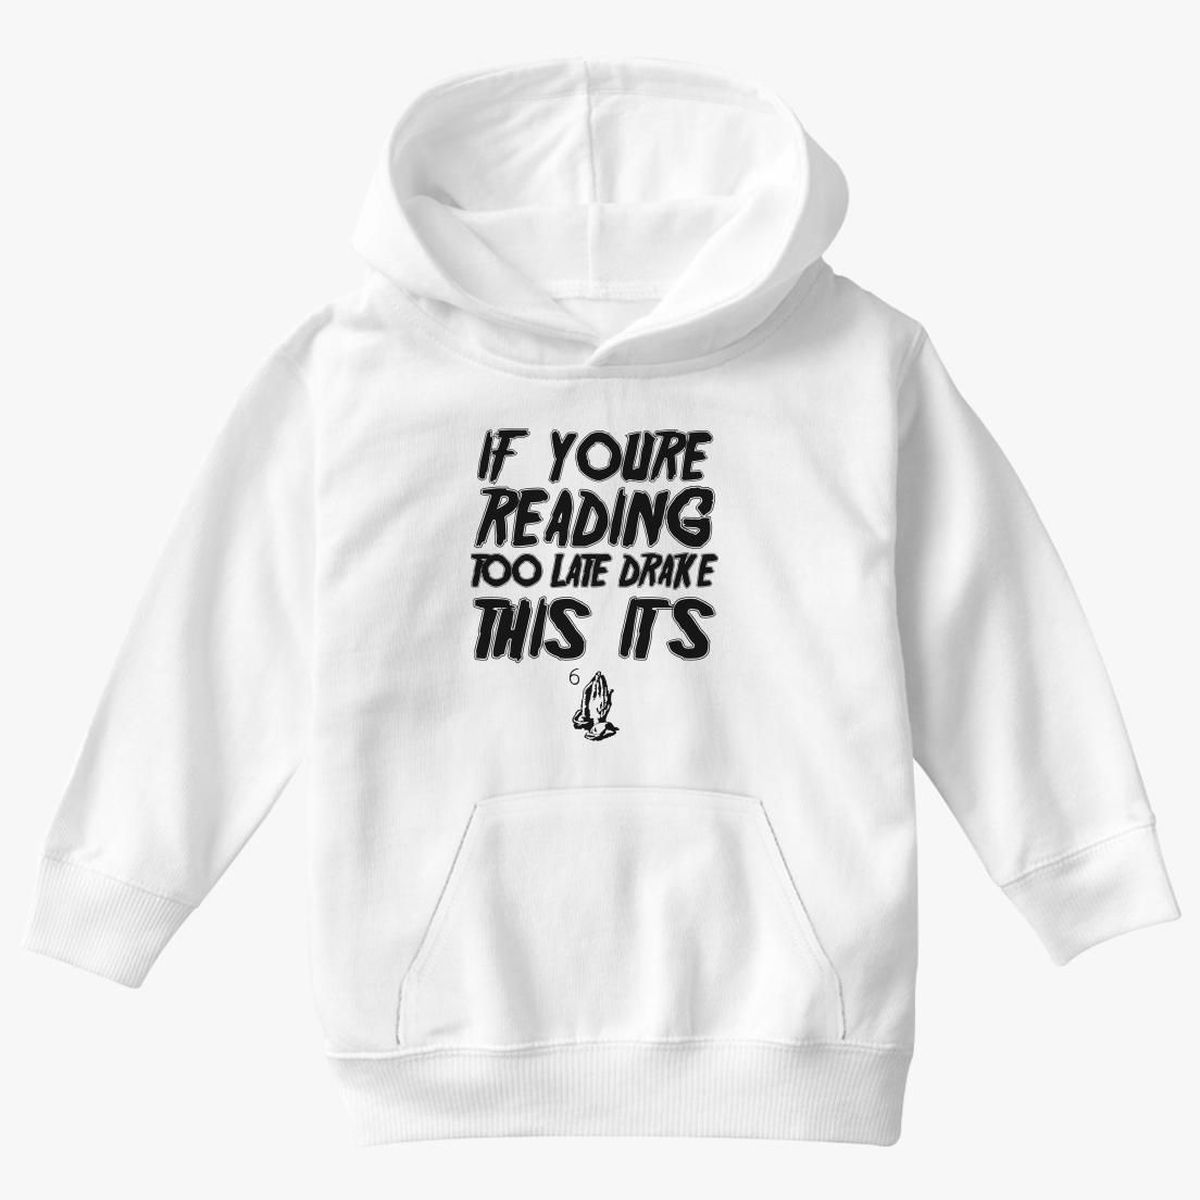 If You're Reading This It's Too Late Drake Kids Hoodie ...